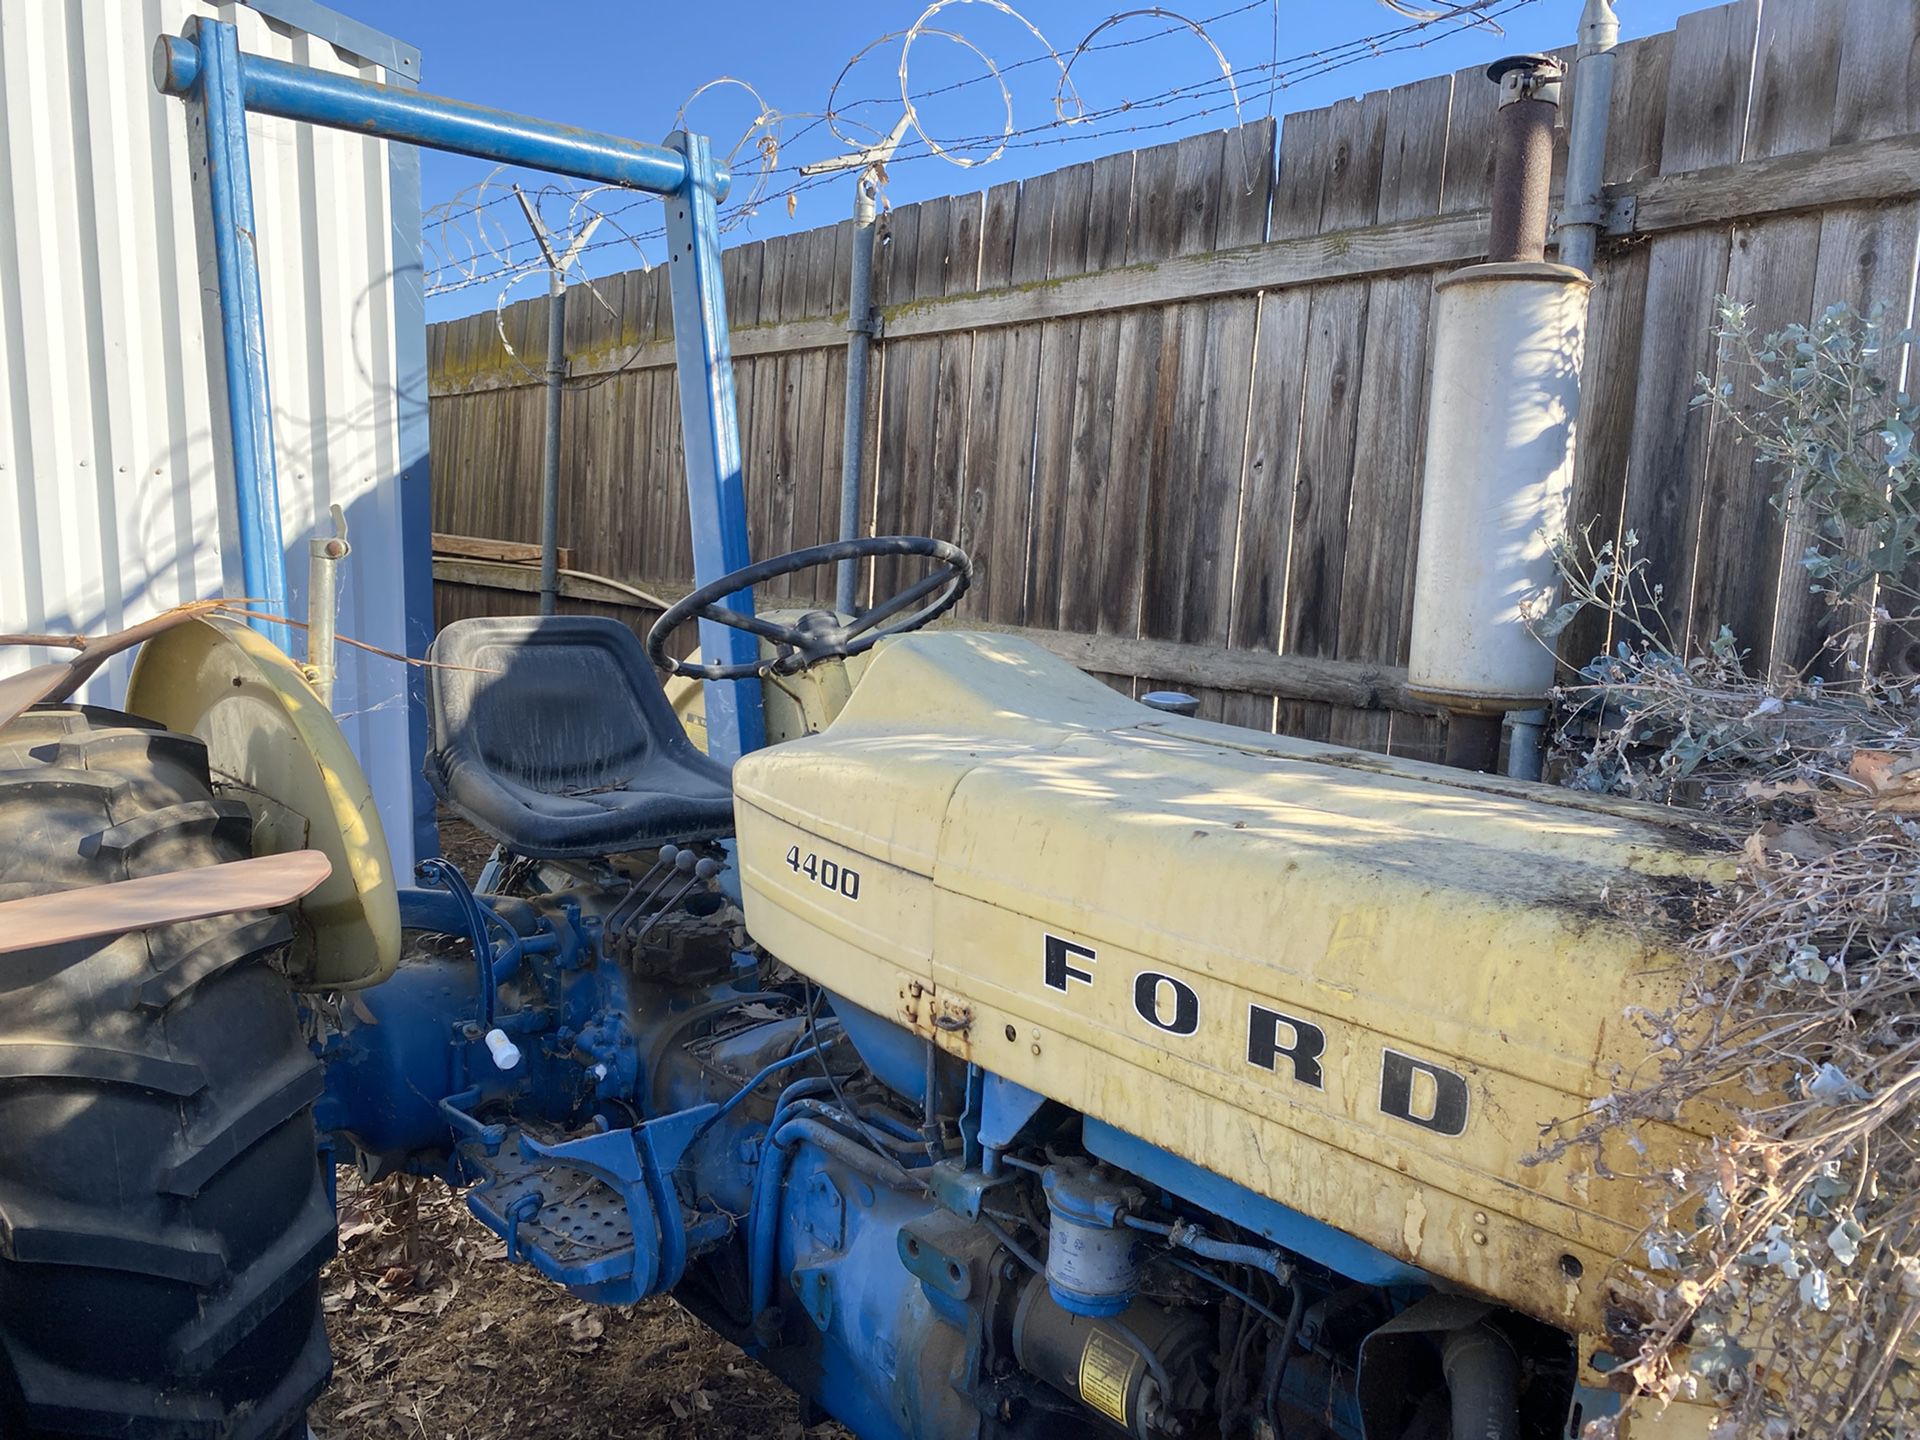 Ford tractor two tractors for the price of one